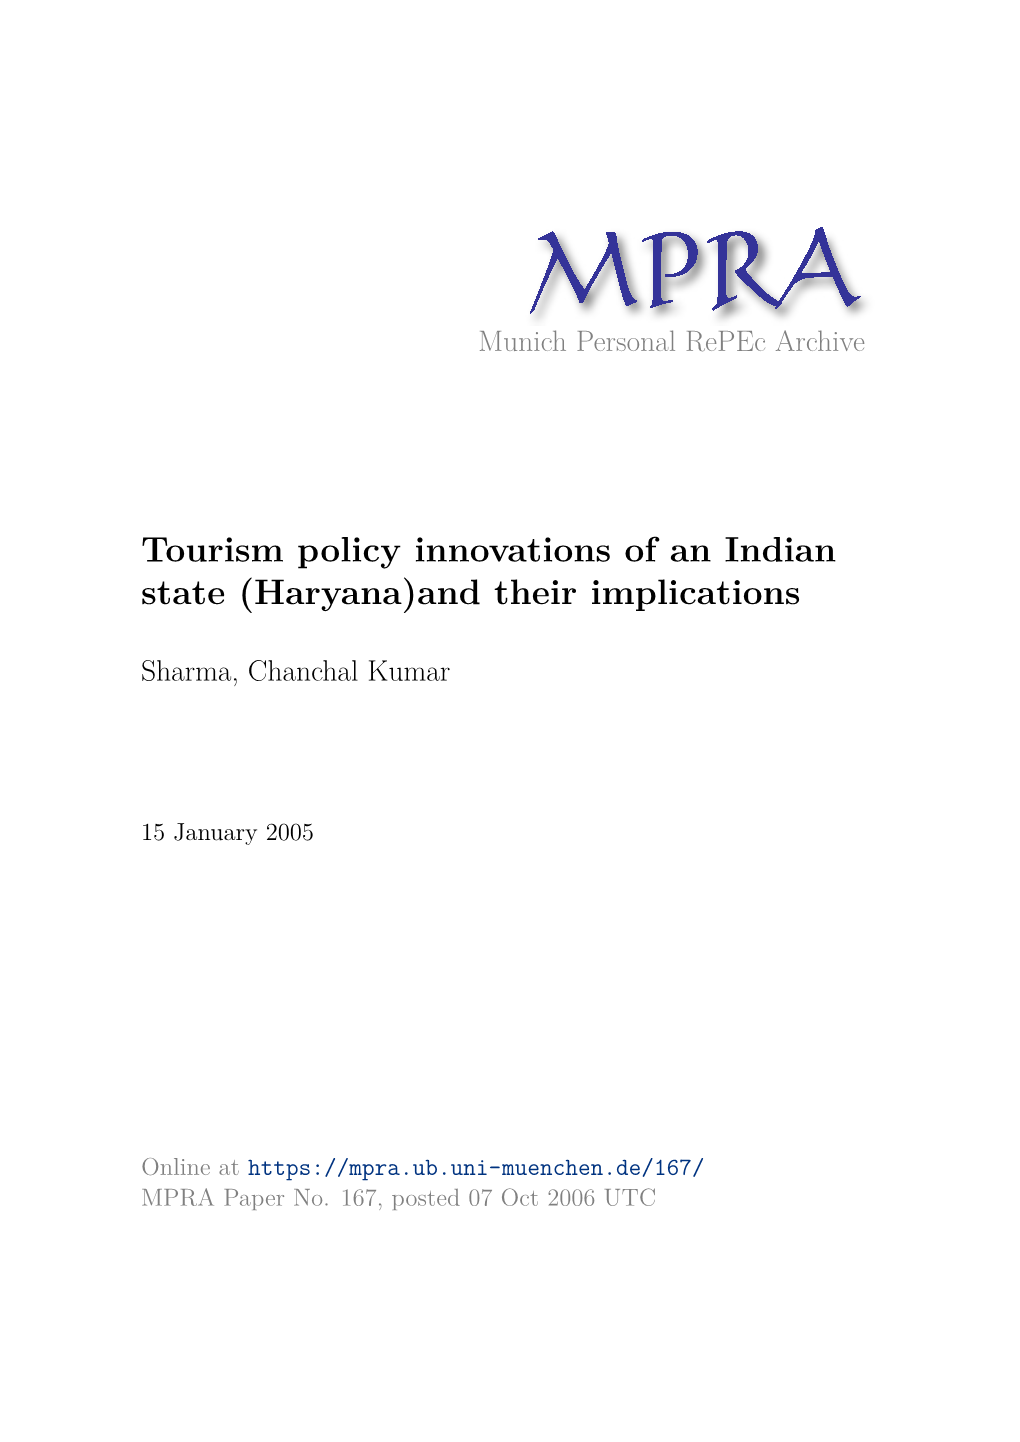 Tourism Policy Innovations of an Indian State (Haryana)And Their Implications